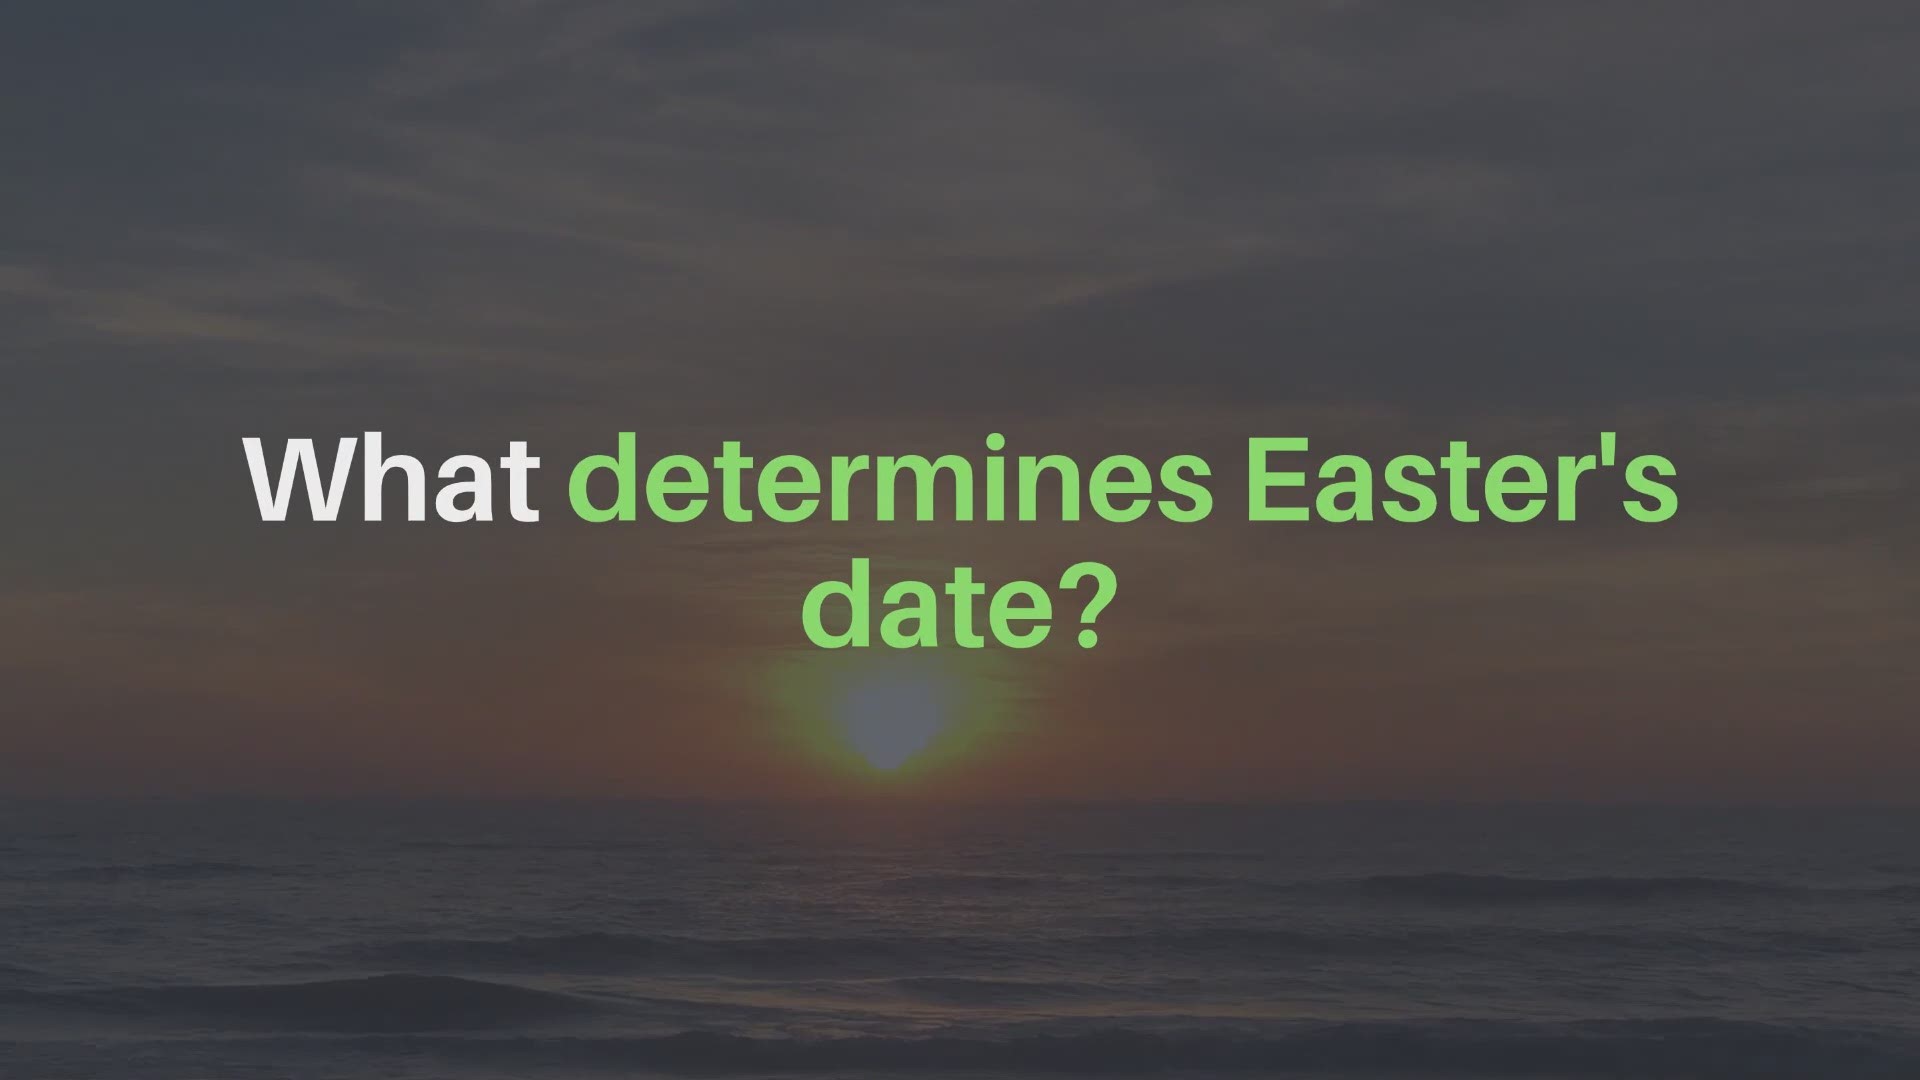 how is date of easter determined